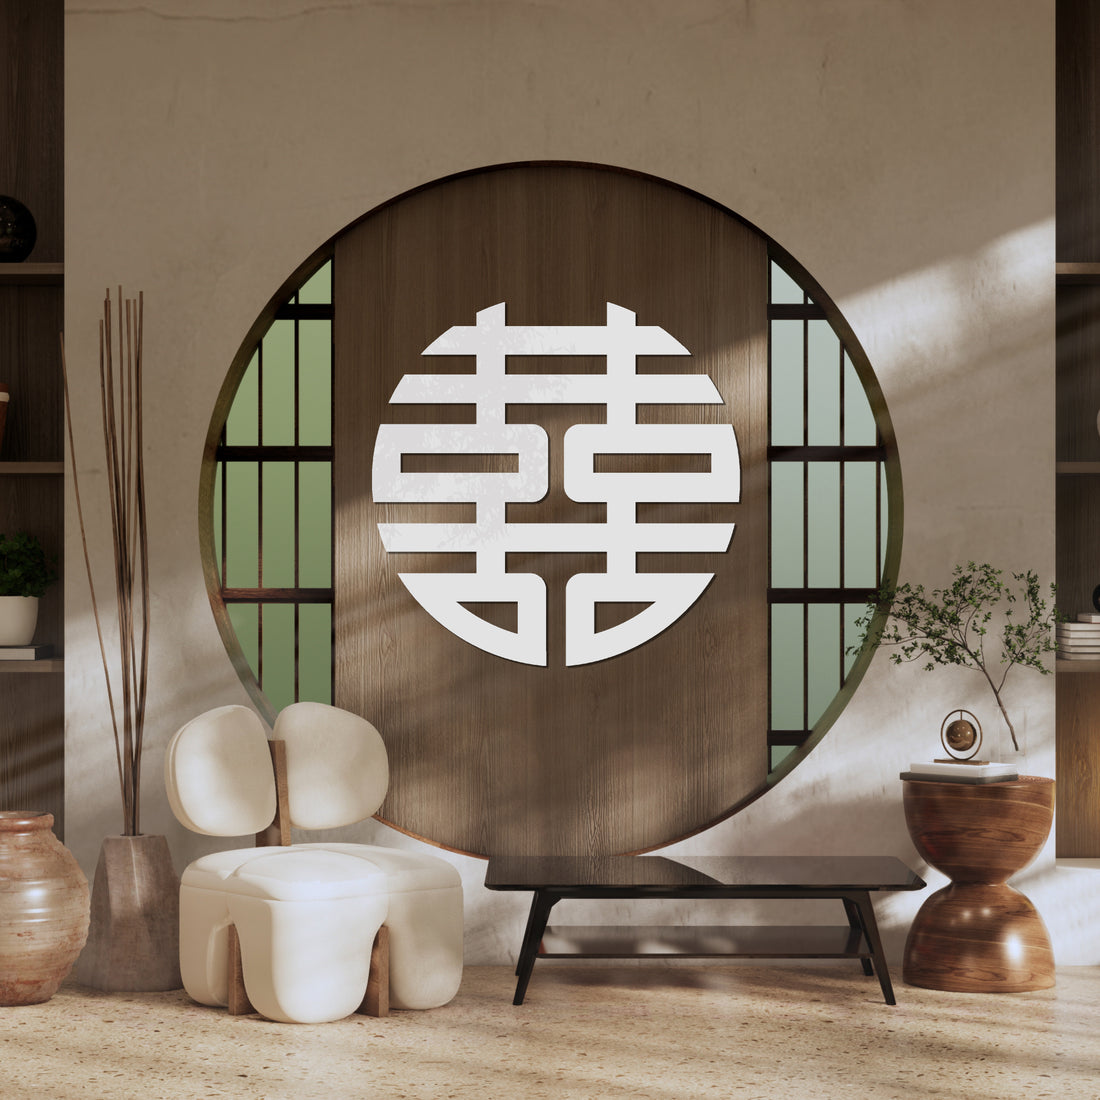 Custom Mirror Acrylic Traditional Asian Wedding Sign Chinese Double Happiness 囍 Vietnamese Hỷ Joy Tea Ceremony Signage Event Wall Decor Hoop